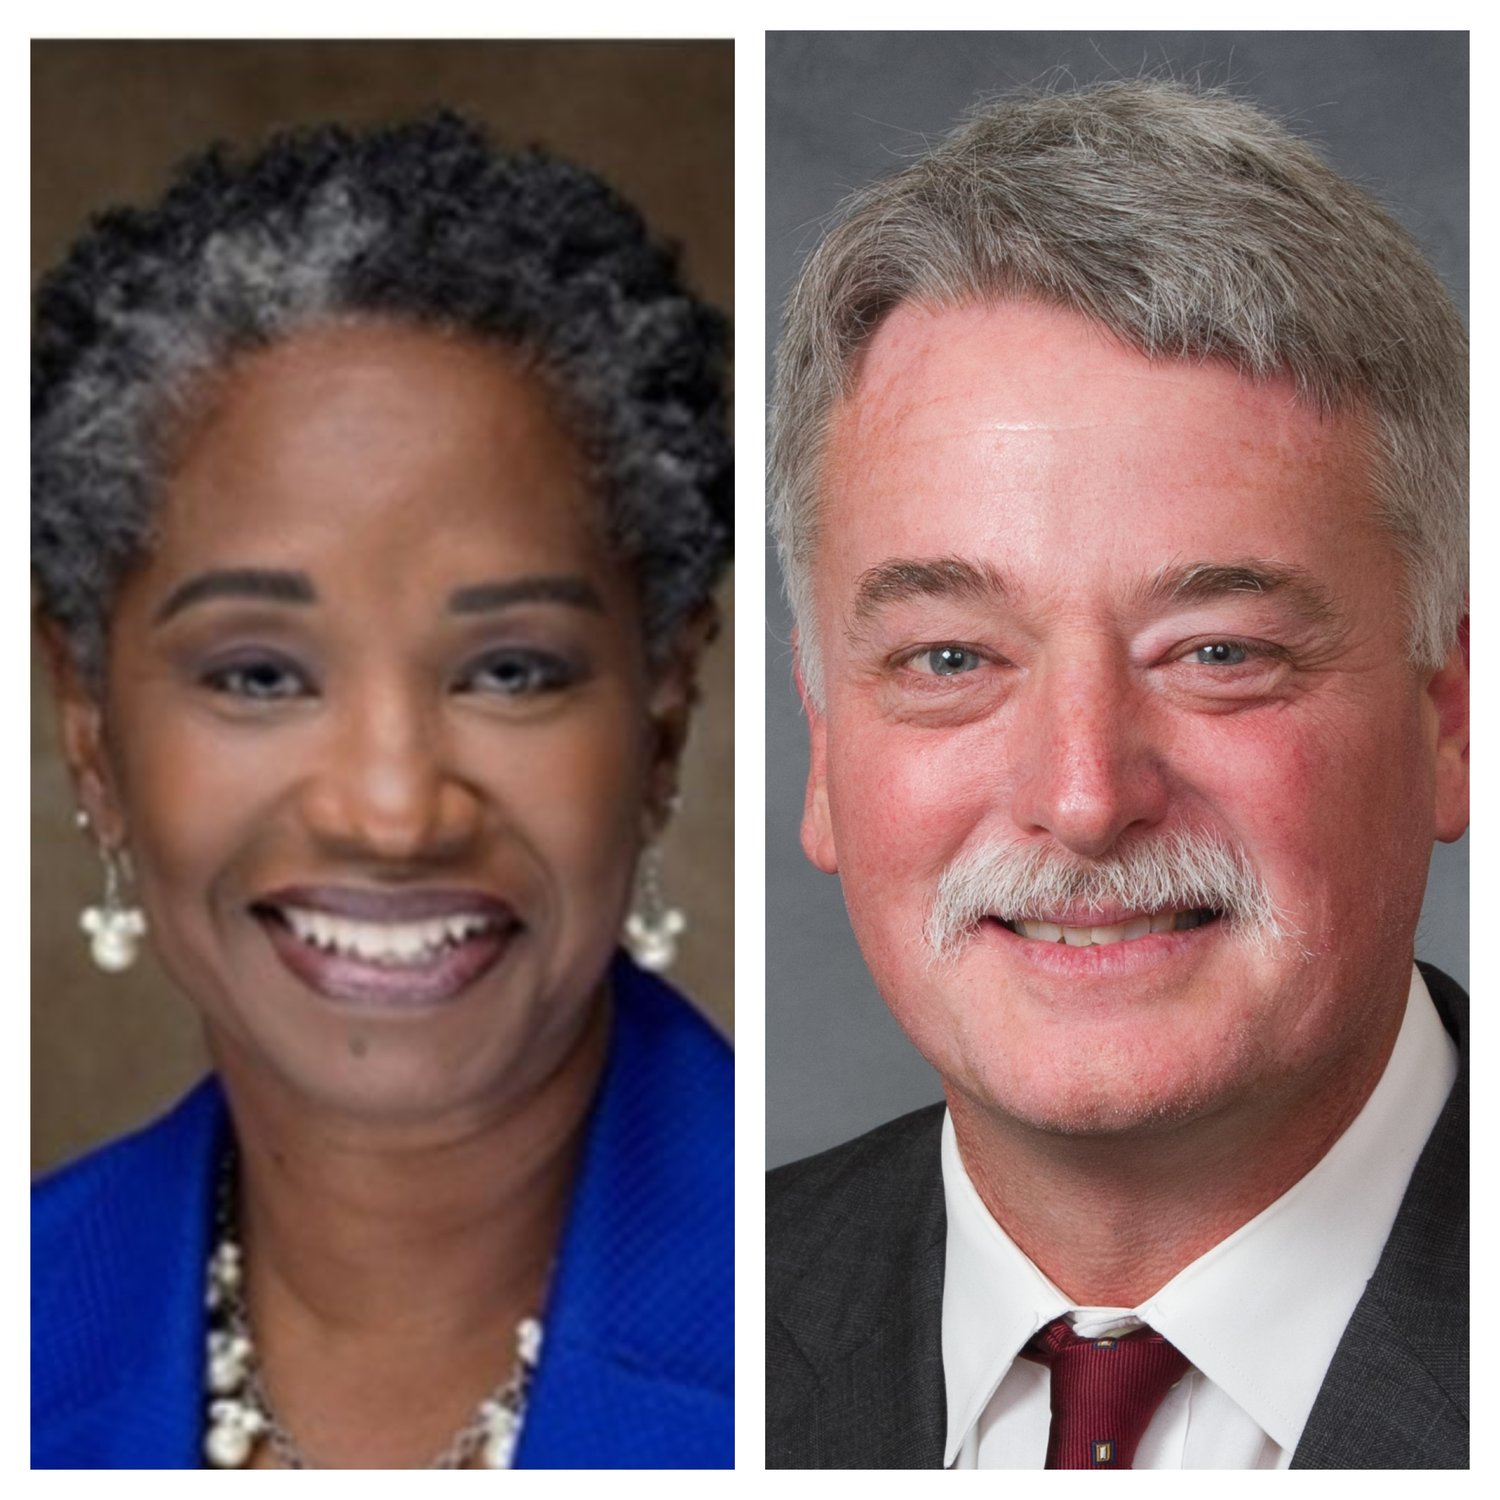 Democrat Val Applewhite defeated Republican Wesley Meredith on Tuesday in the race for the N.C. Senate District 19 seat.